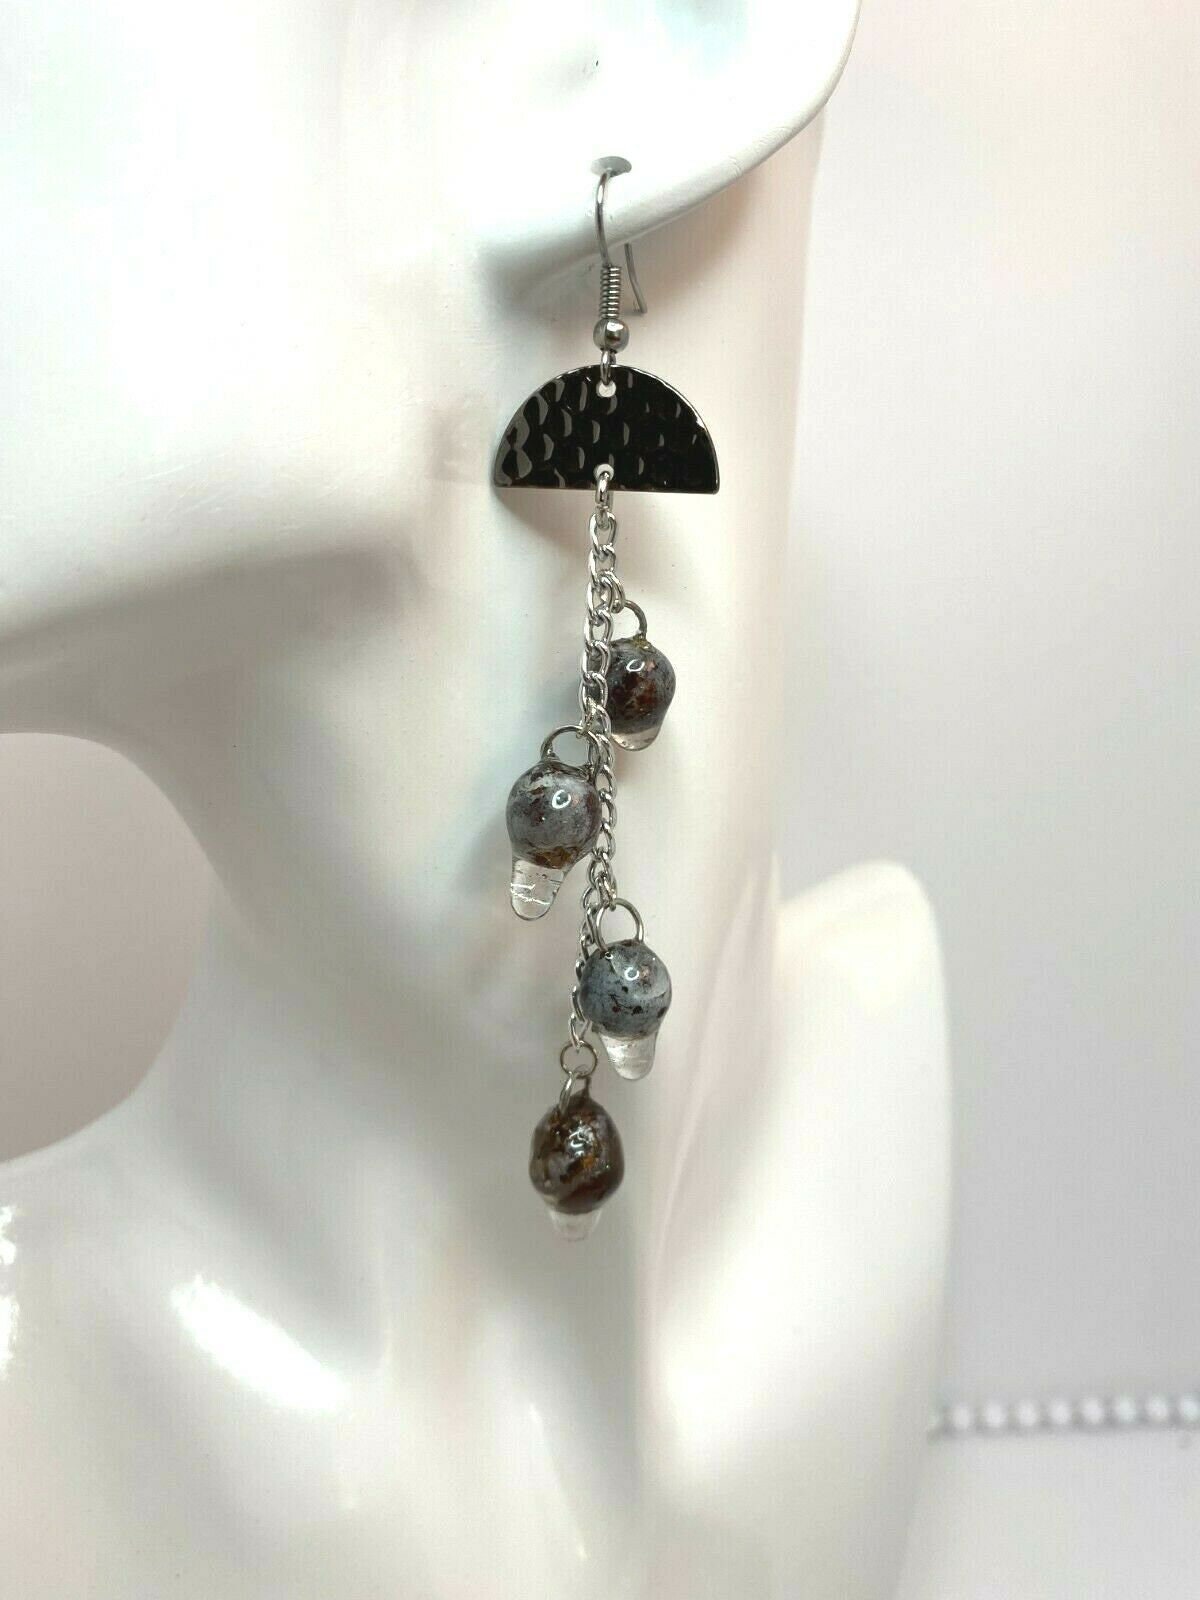 Handmade Juniper Berry Natural Dried Plant Resin Earrings , Lightweight, Drop, Dangle, Oregon Made, One Of A Kind.